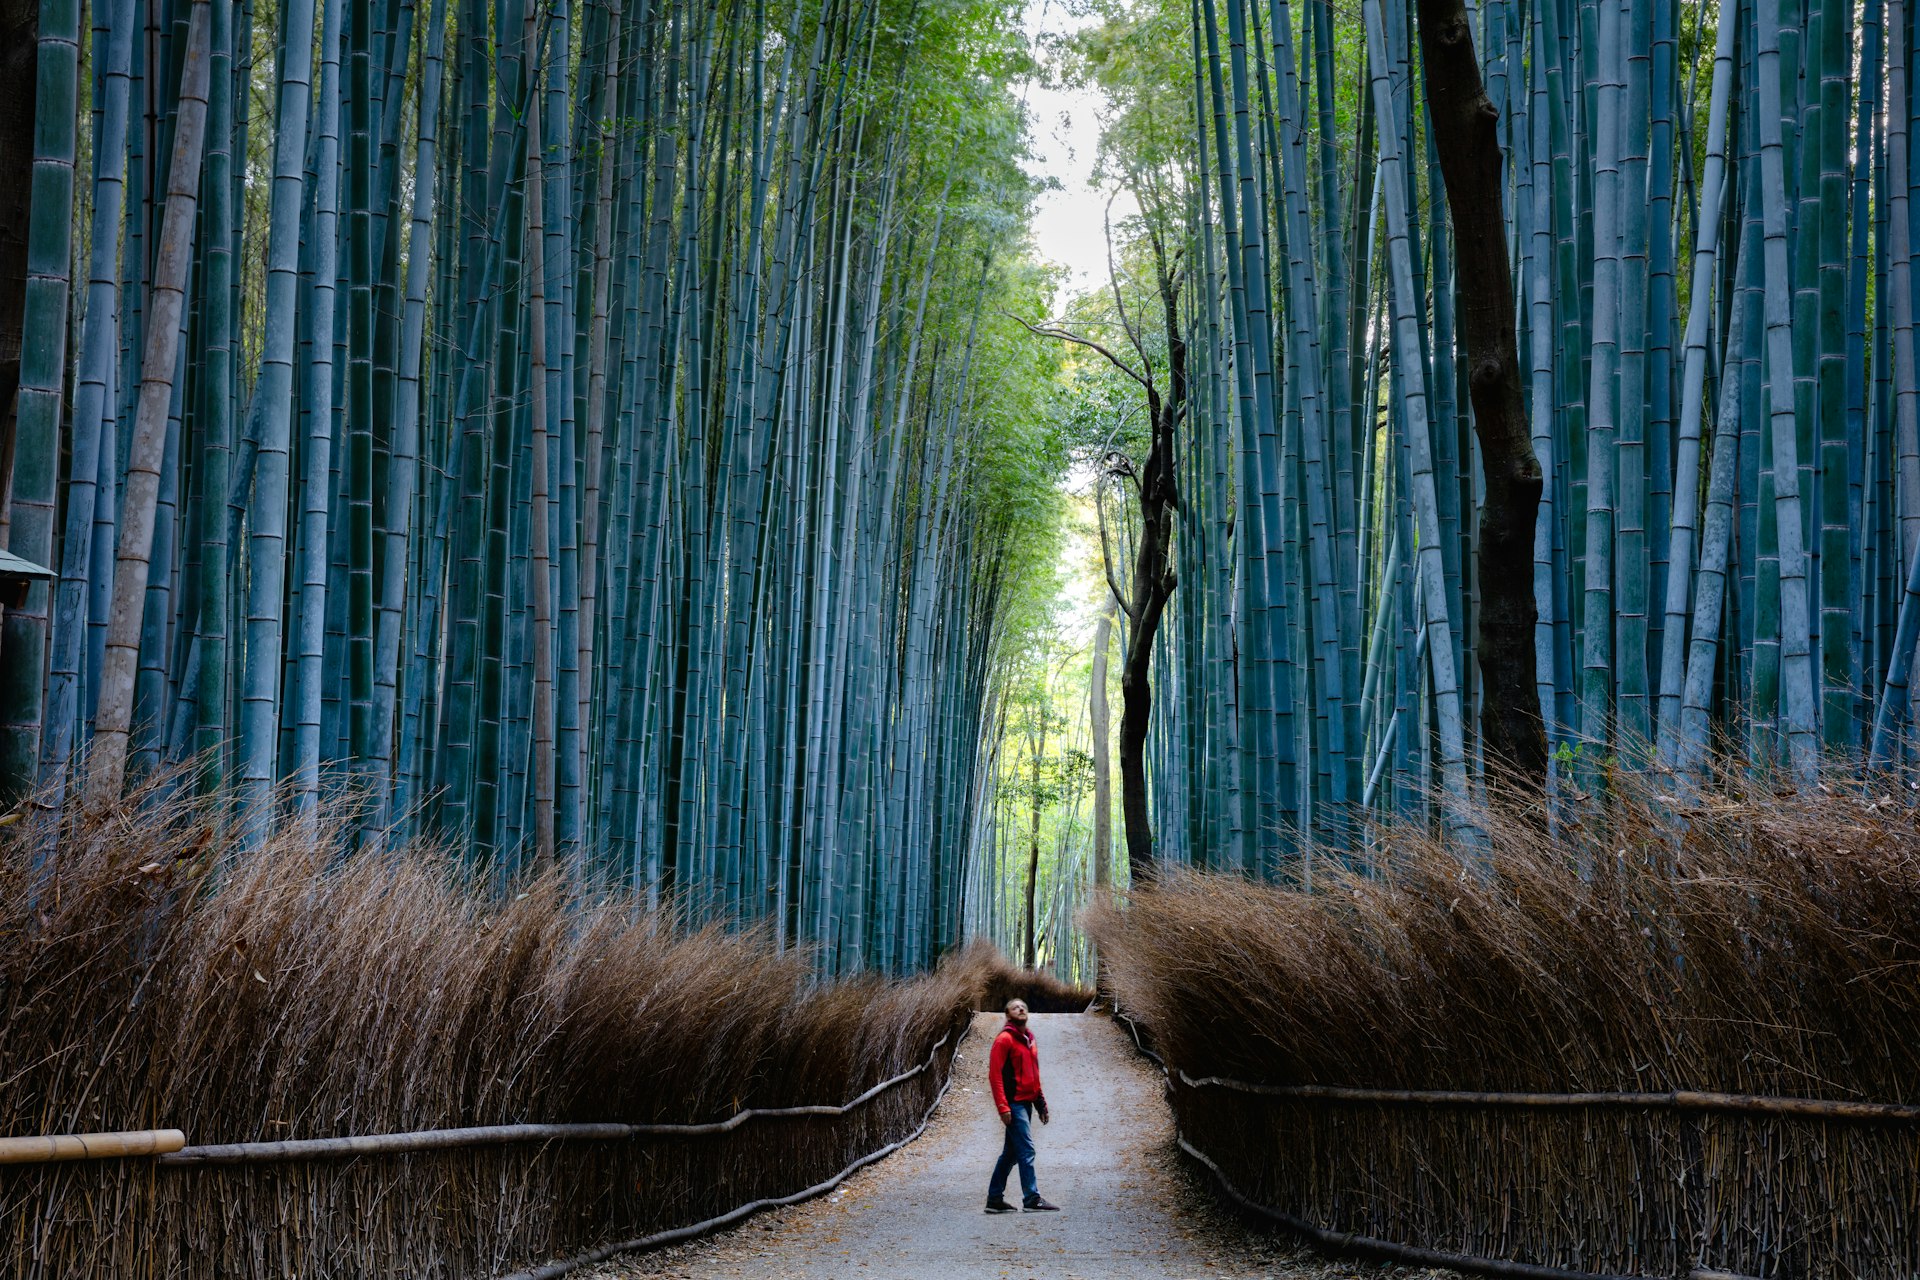 Man standing in a towering bamboo forest near Kyoto, Japan